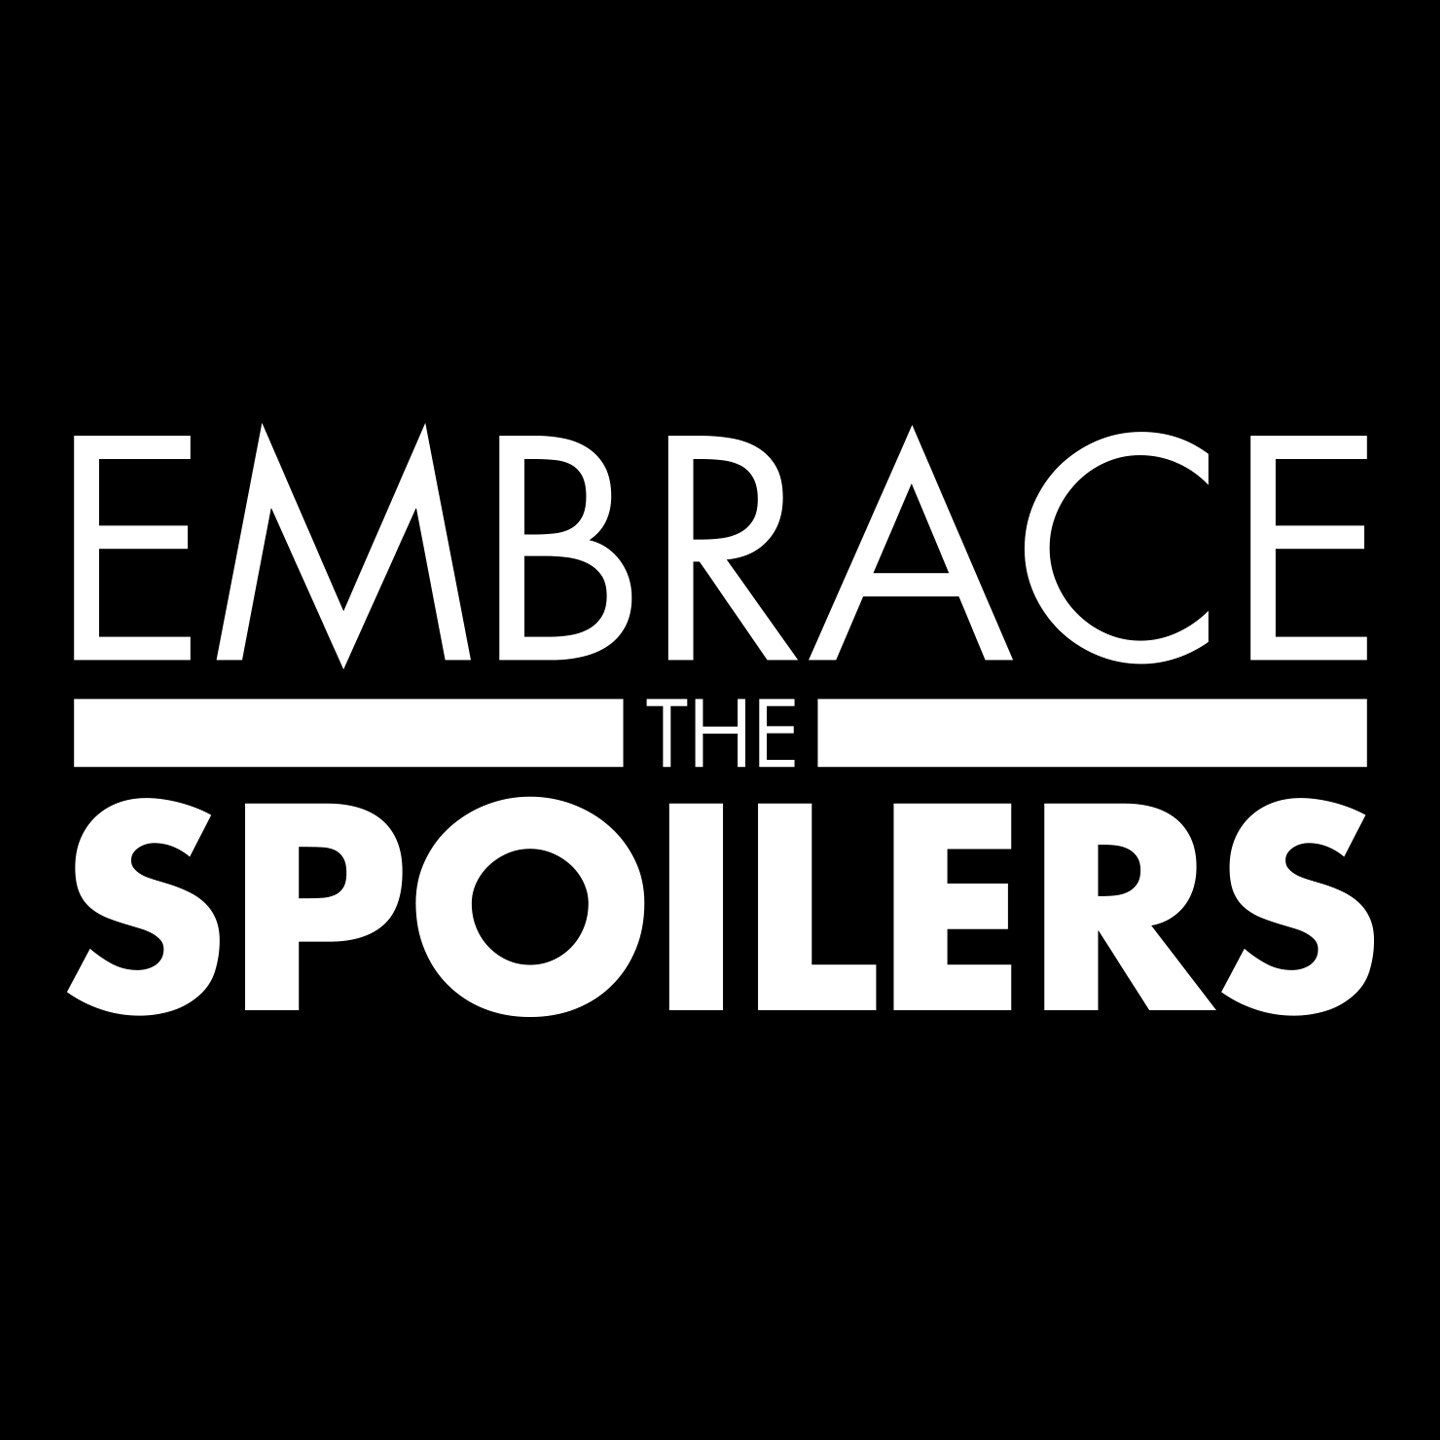 Embrace the Spoilers: Game of Thrones - S8 E5 The Bells